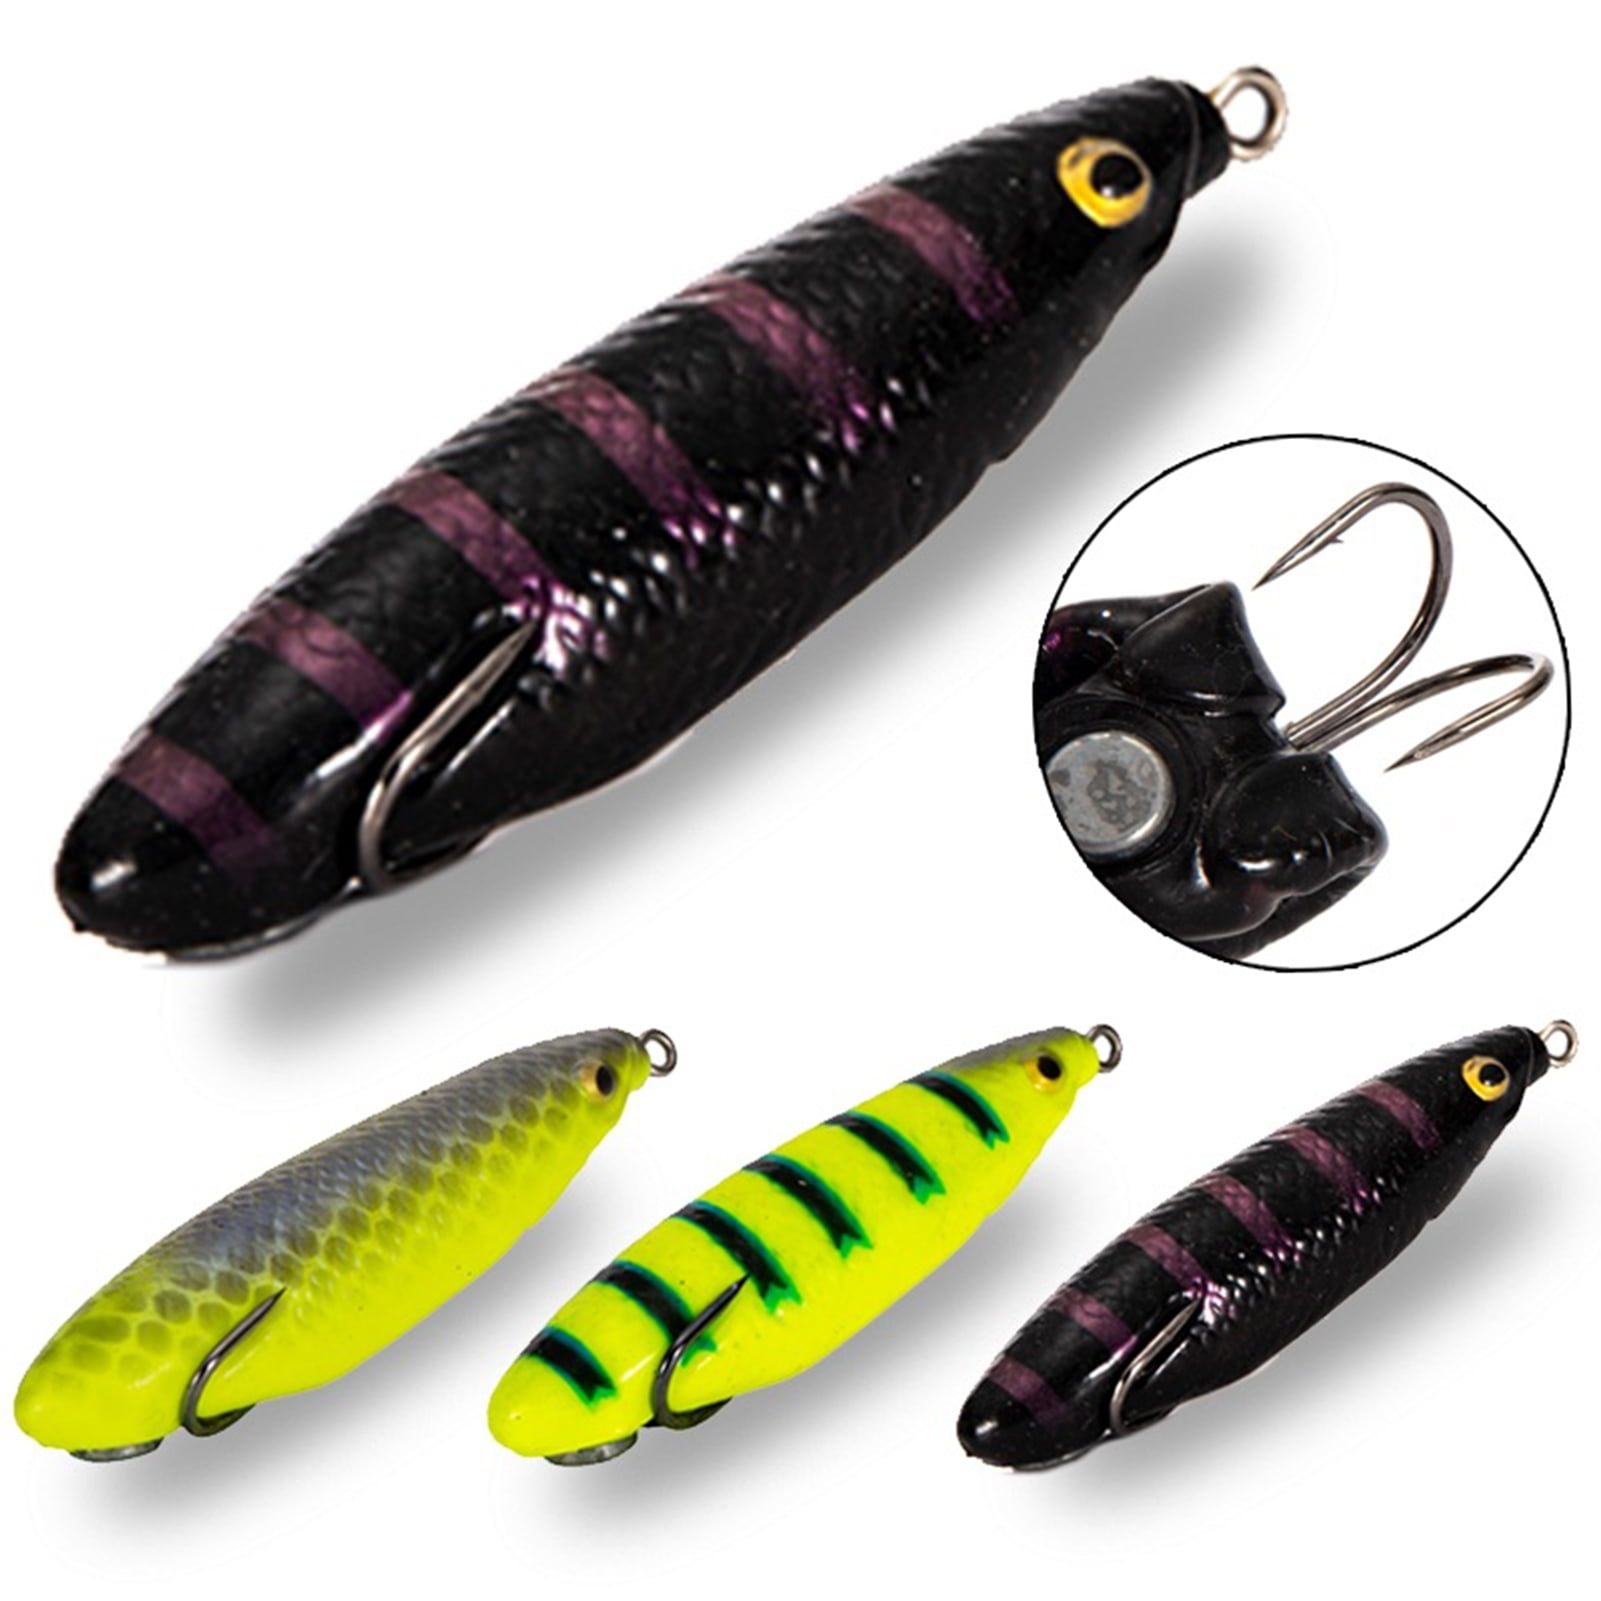 5PCS Night Fishing Lures Soft Jig Head Bait Glow Artificial Silicone Saltwater